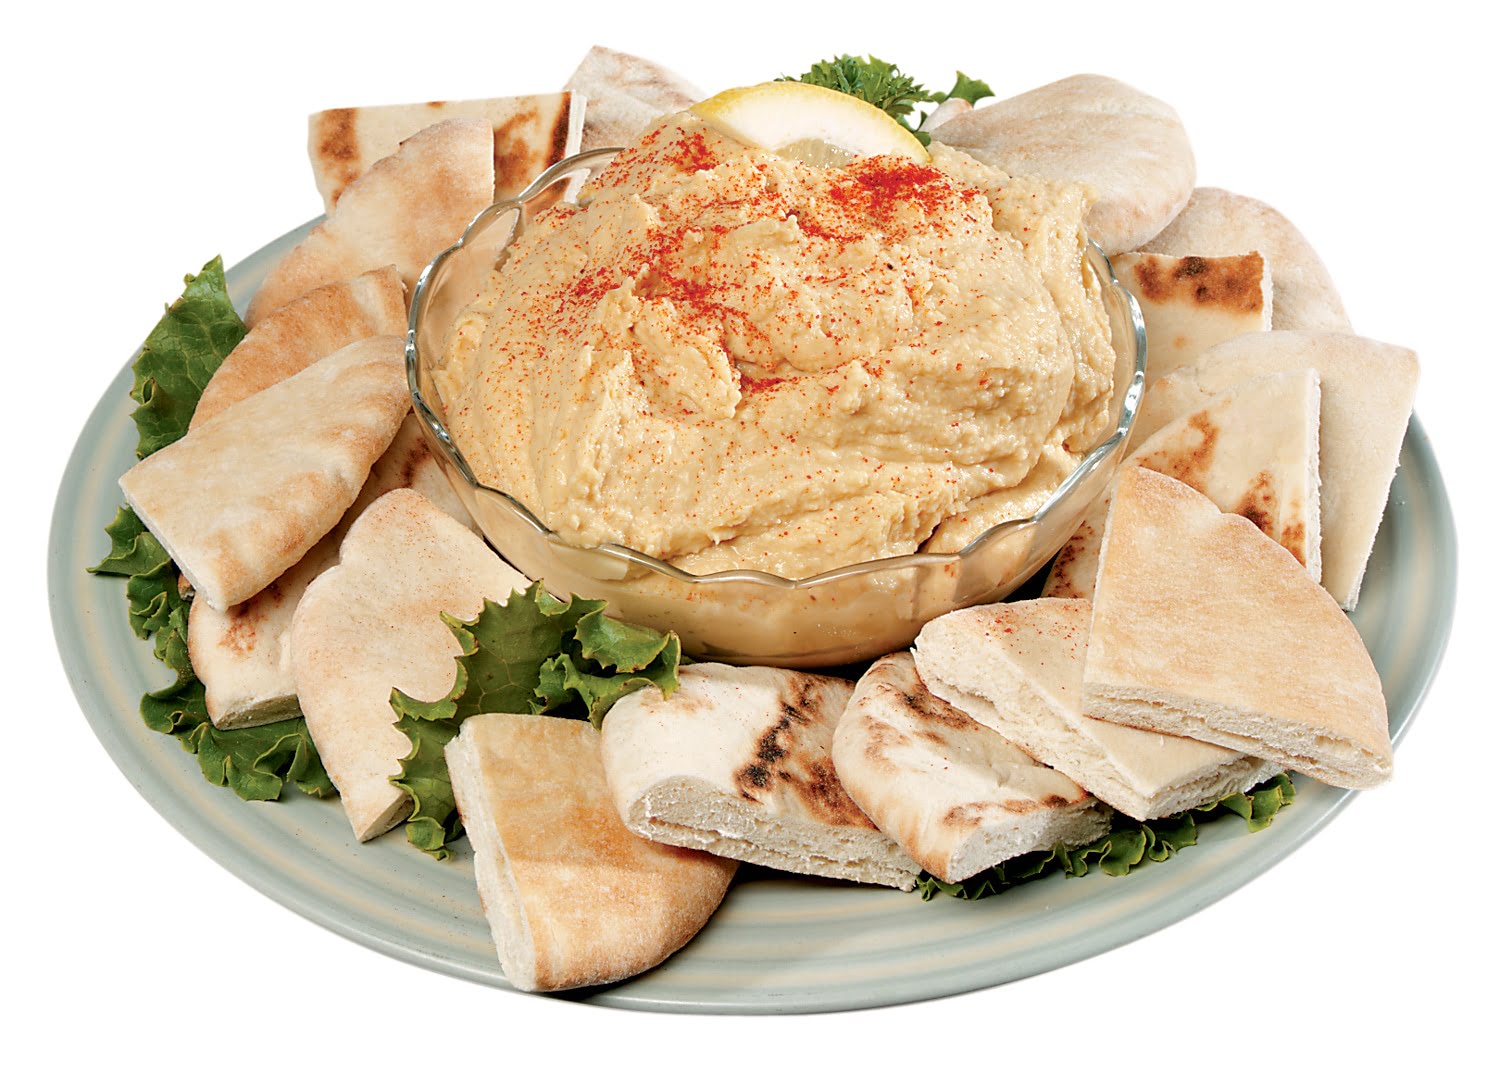 Hummus Food Picture